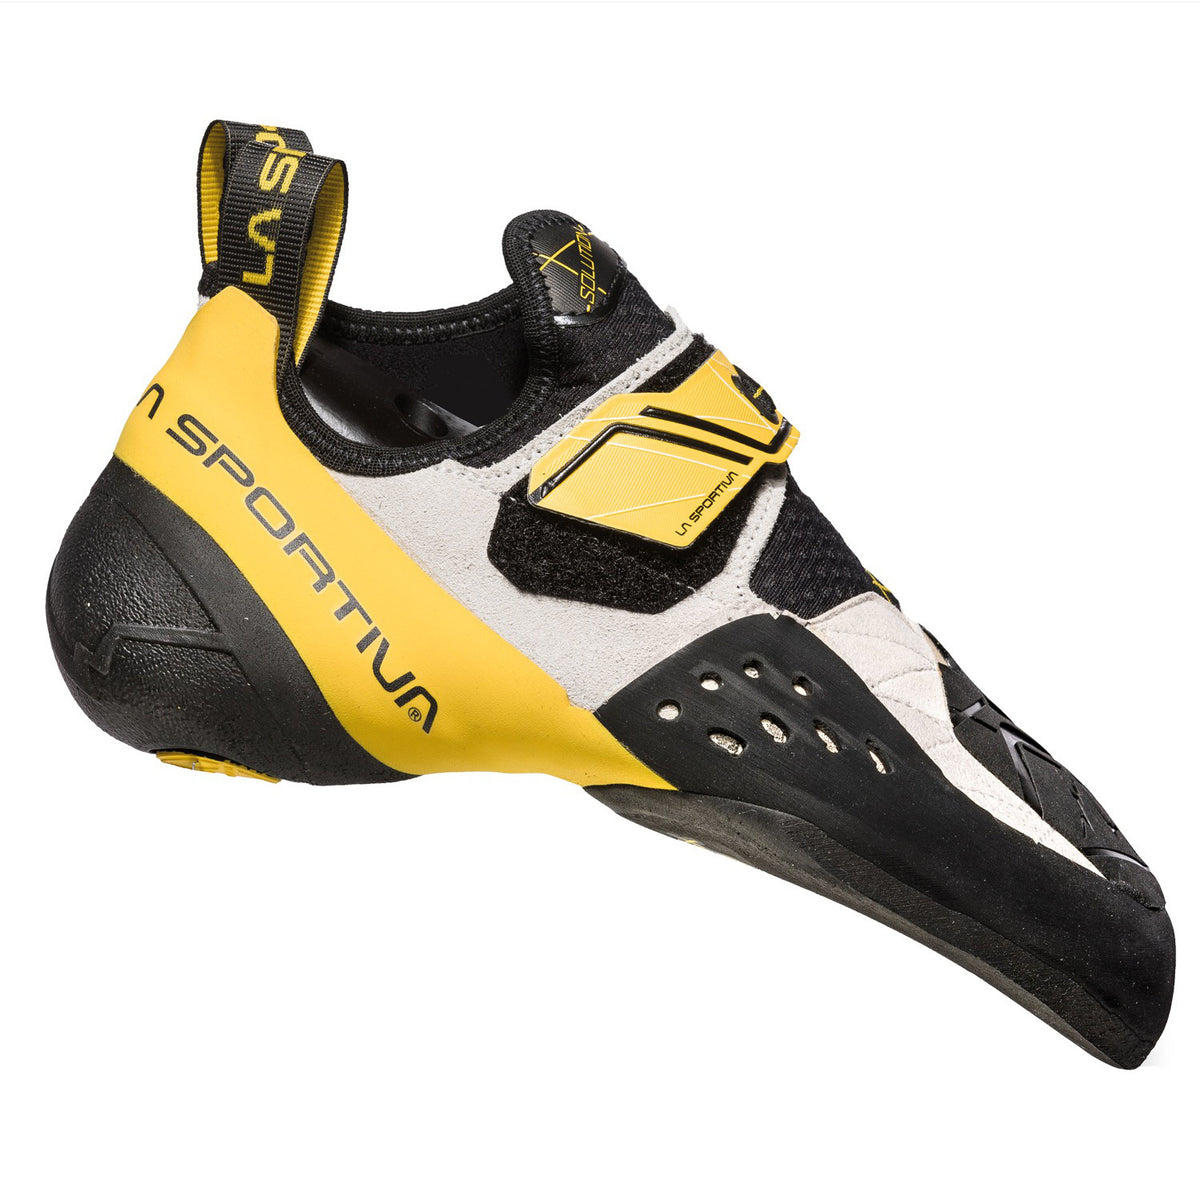 La Sportiva Solution climbing shoe, as seen from the outside